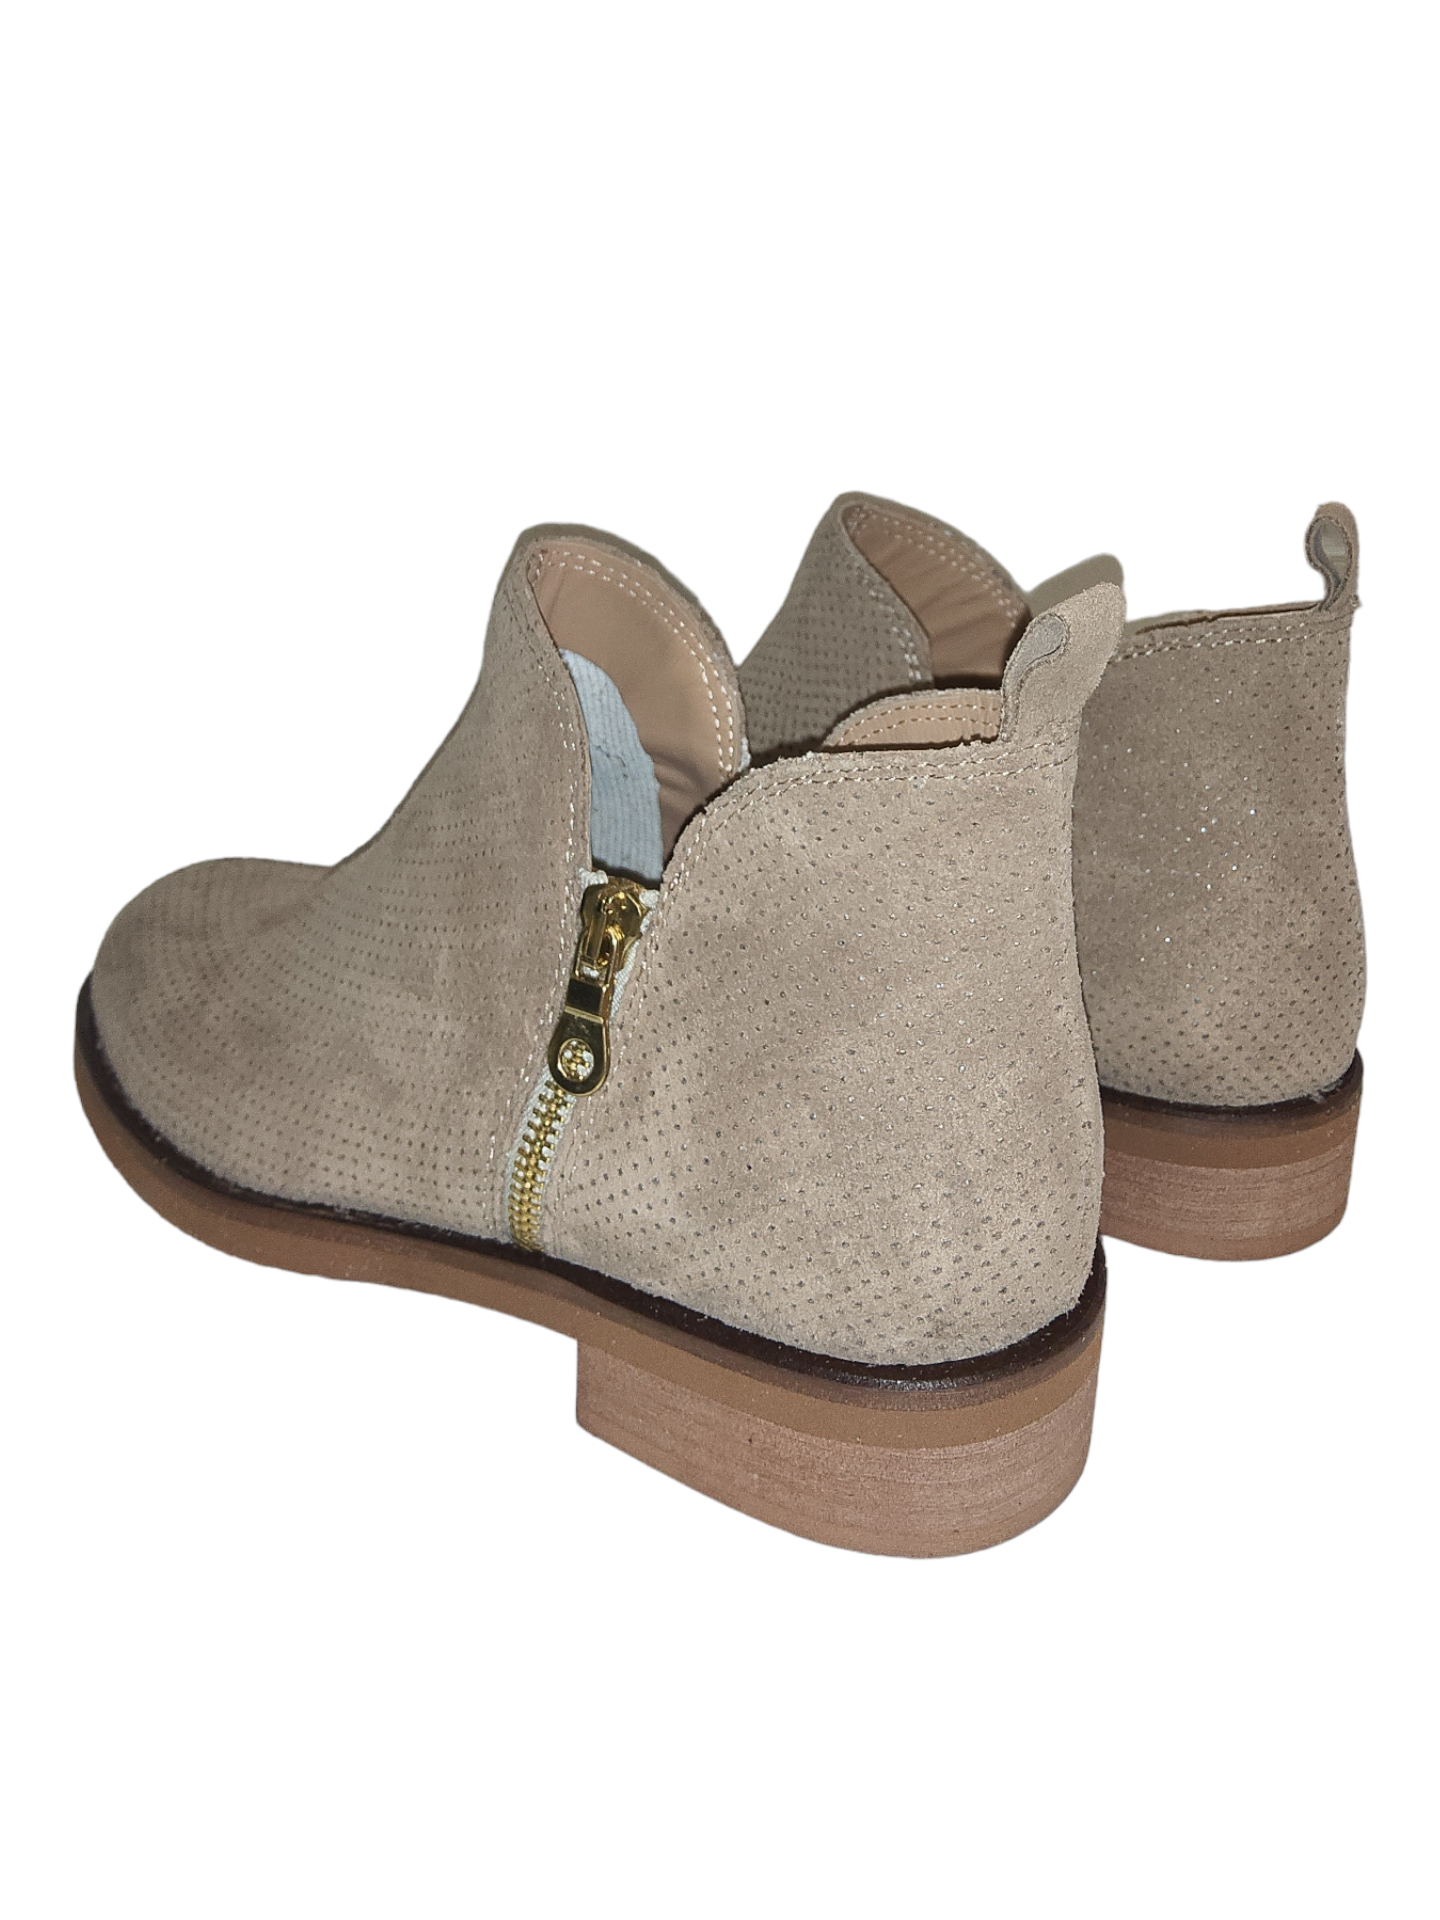 Beige leather ankle boots